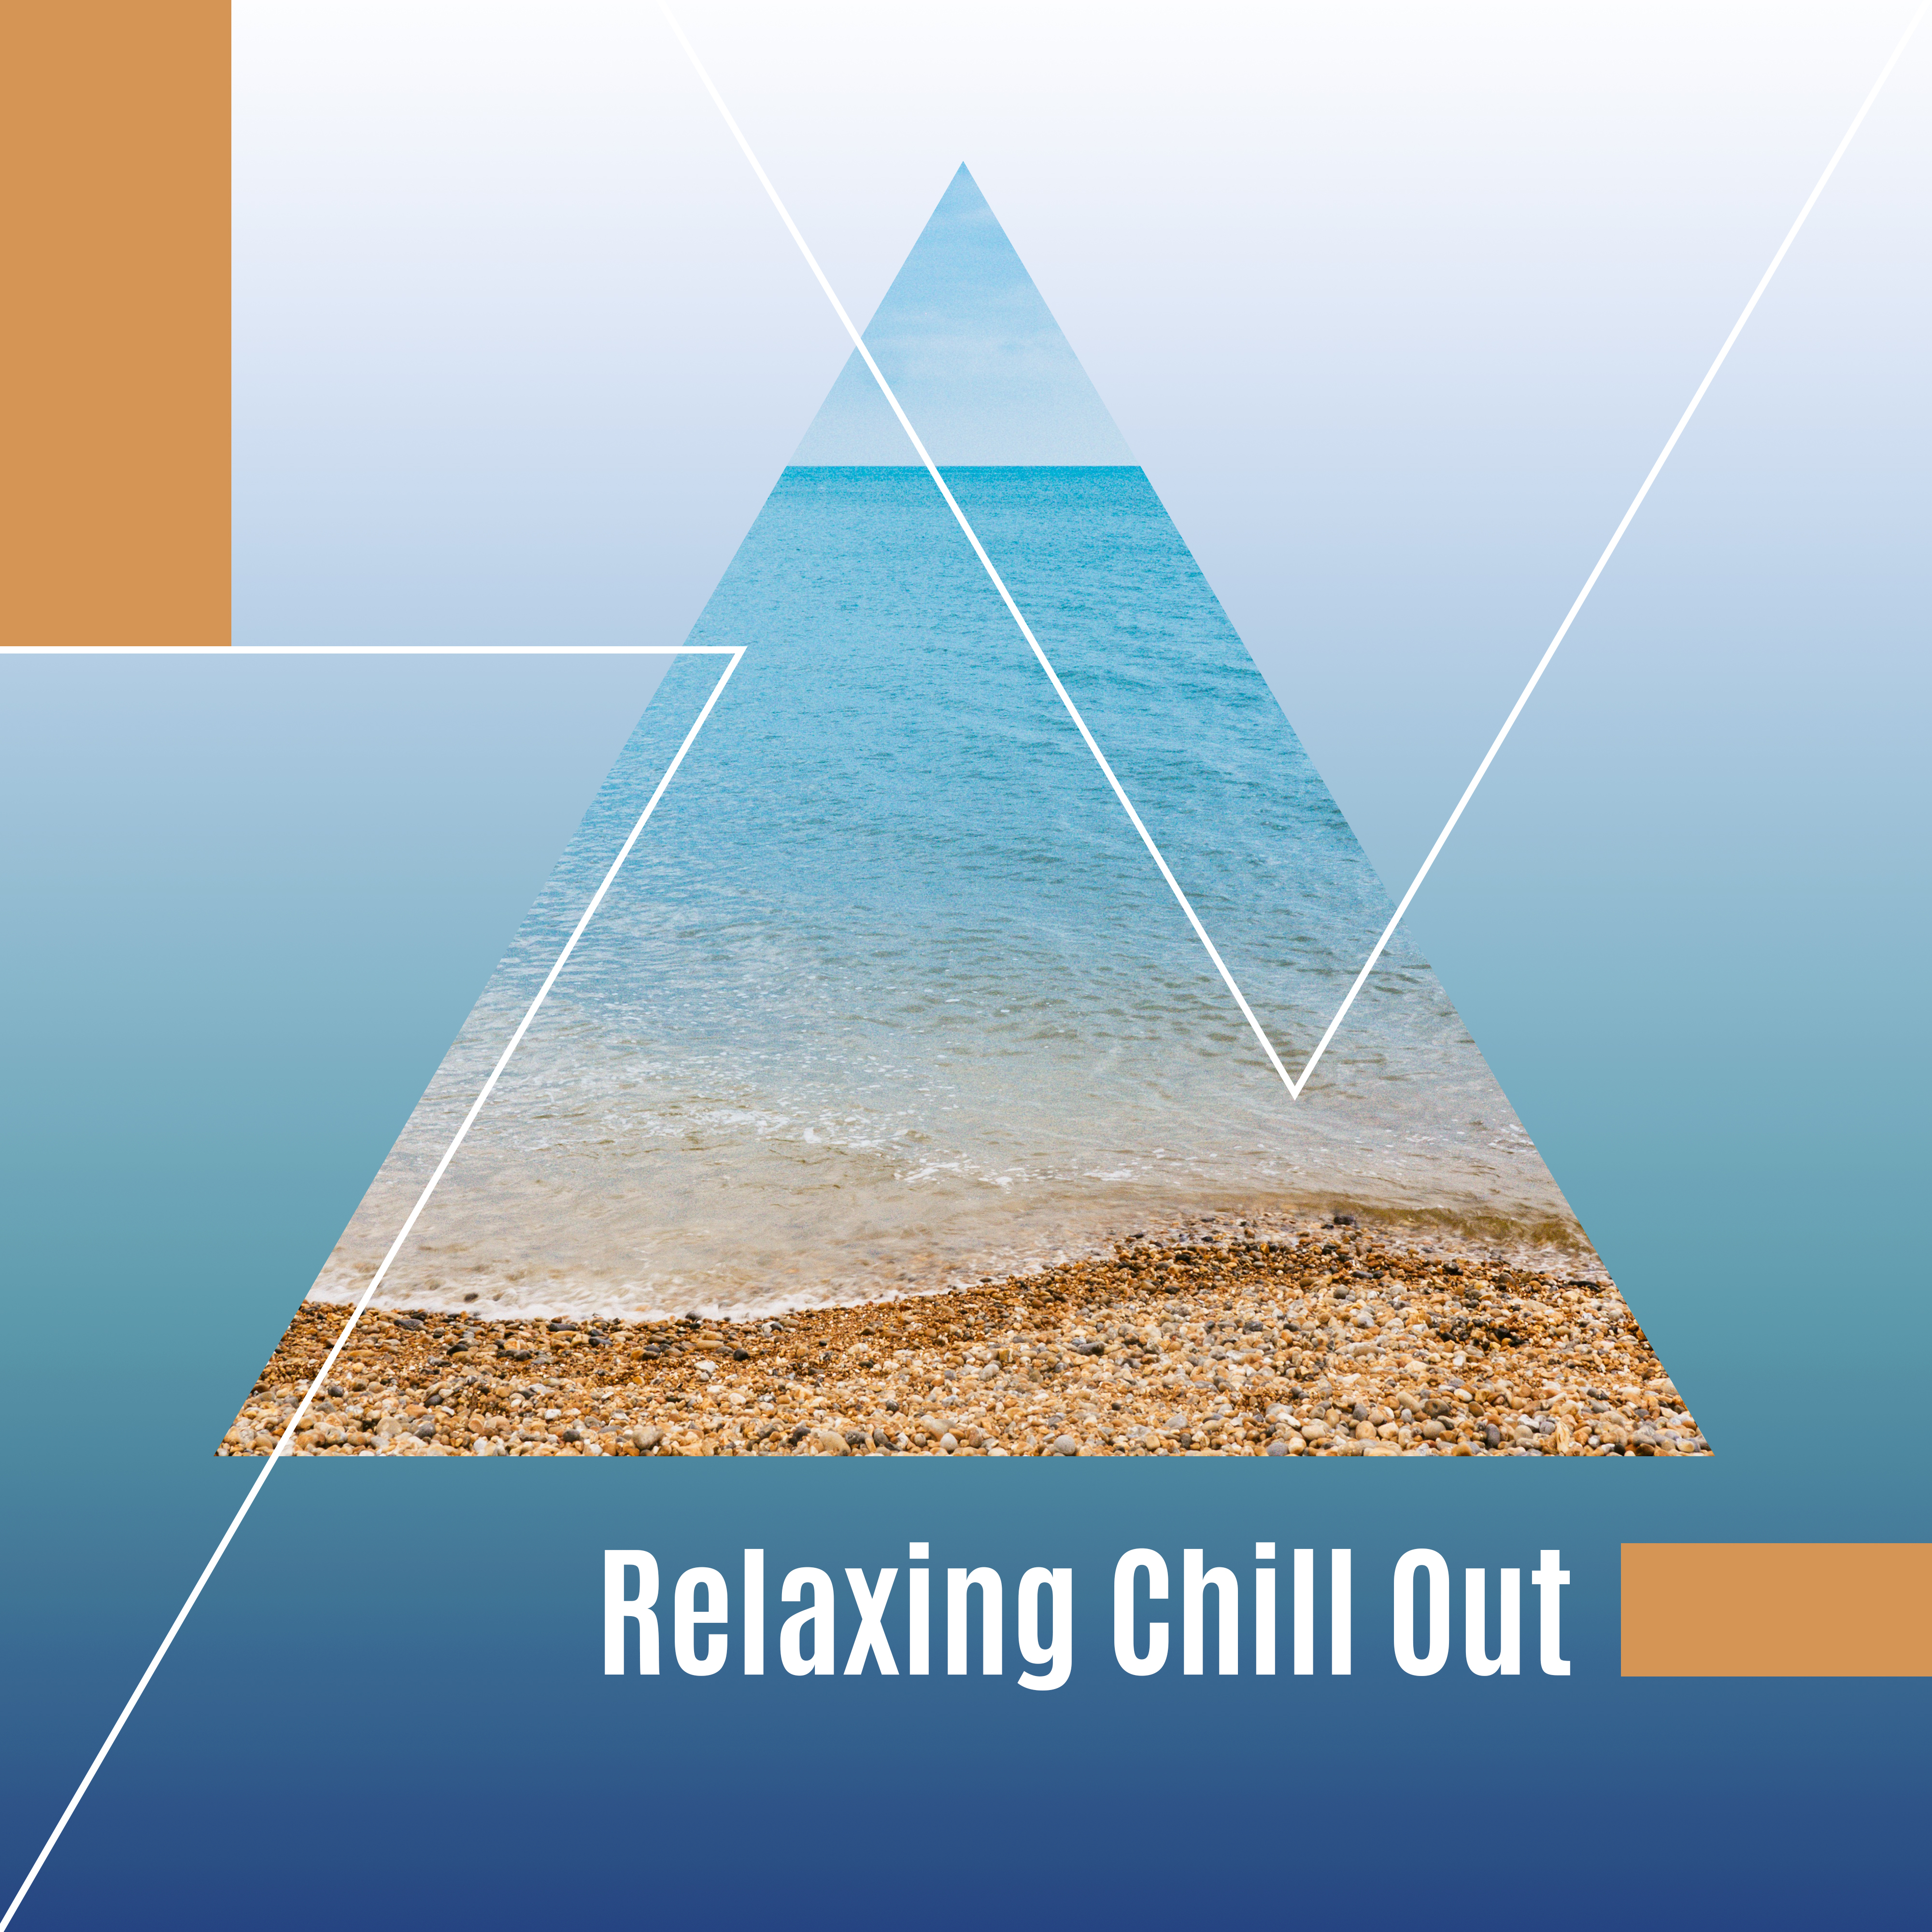 Relaxing Chill Out – Music to Rest, Summertime Sounds, Beach Lounge, Chill a Bit